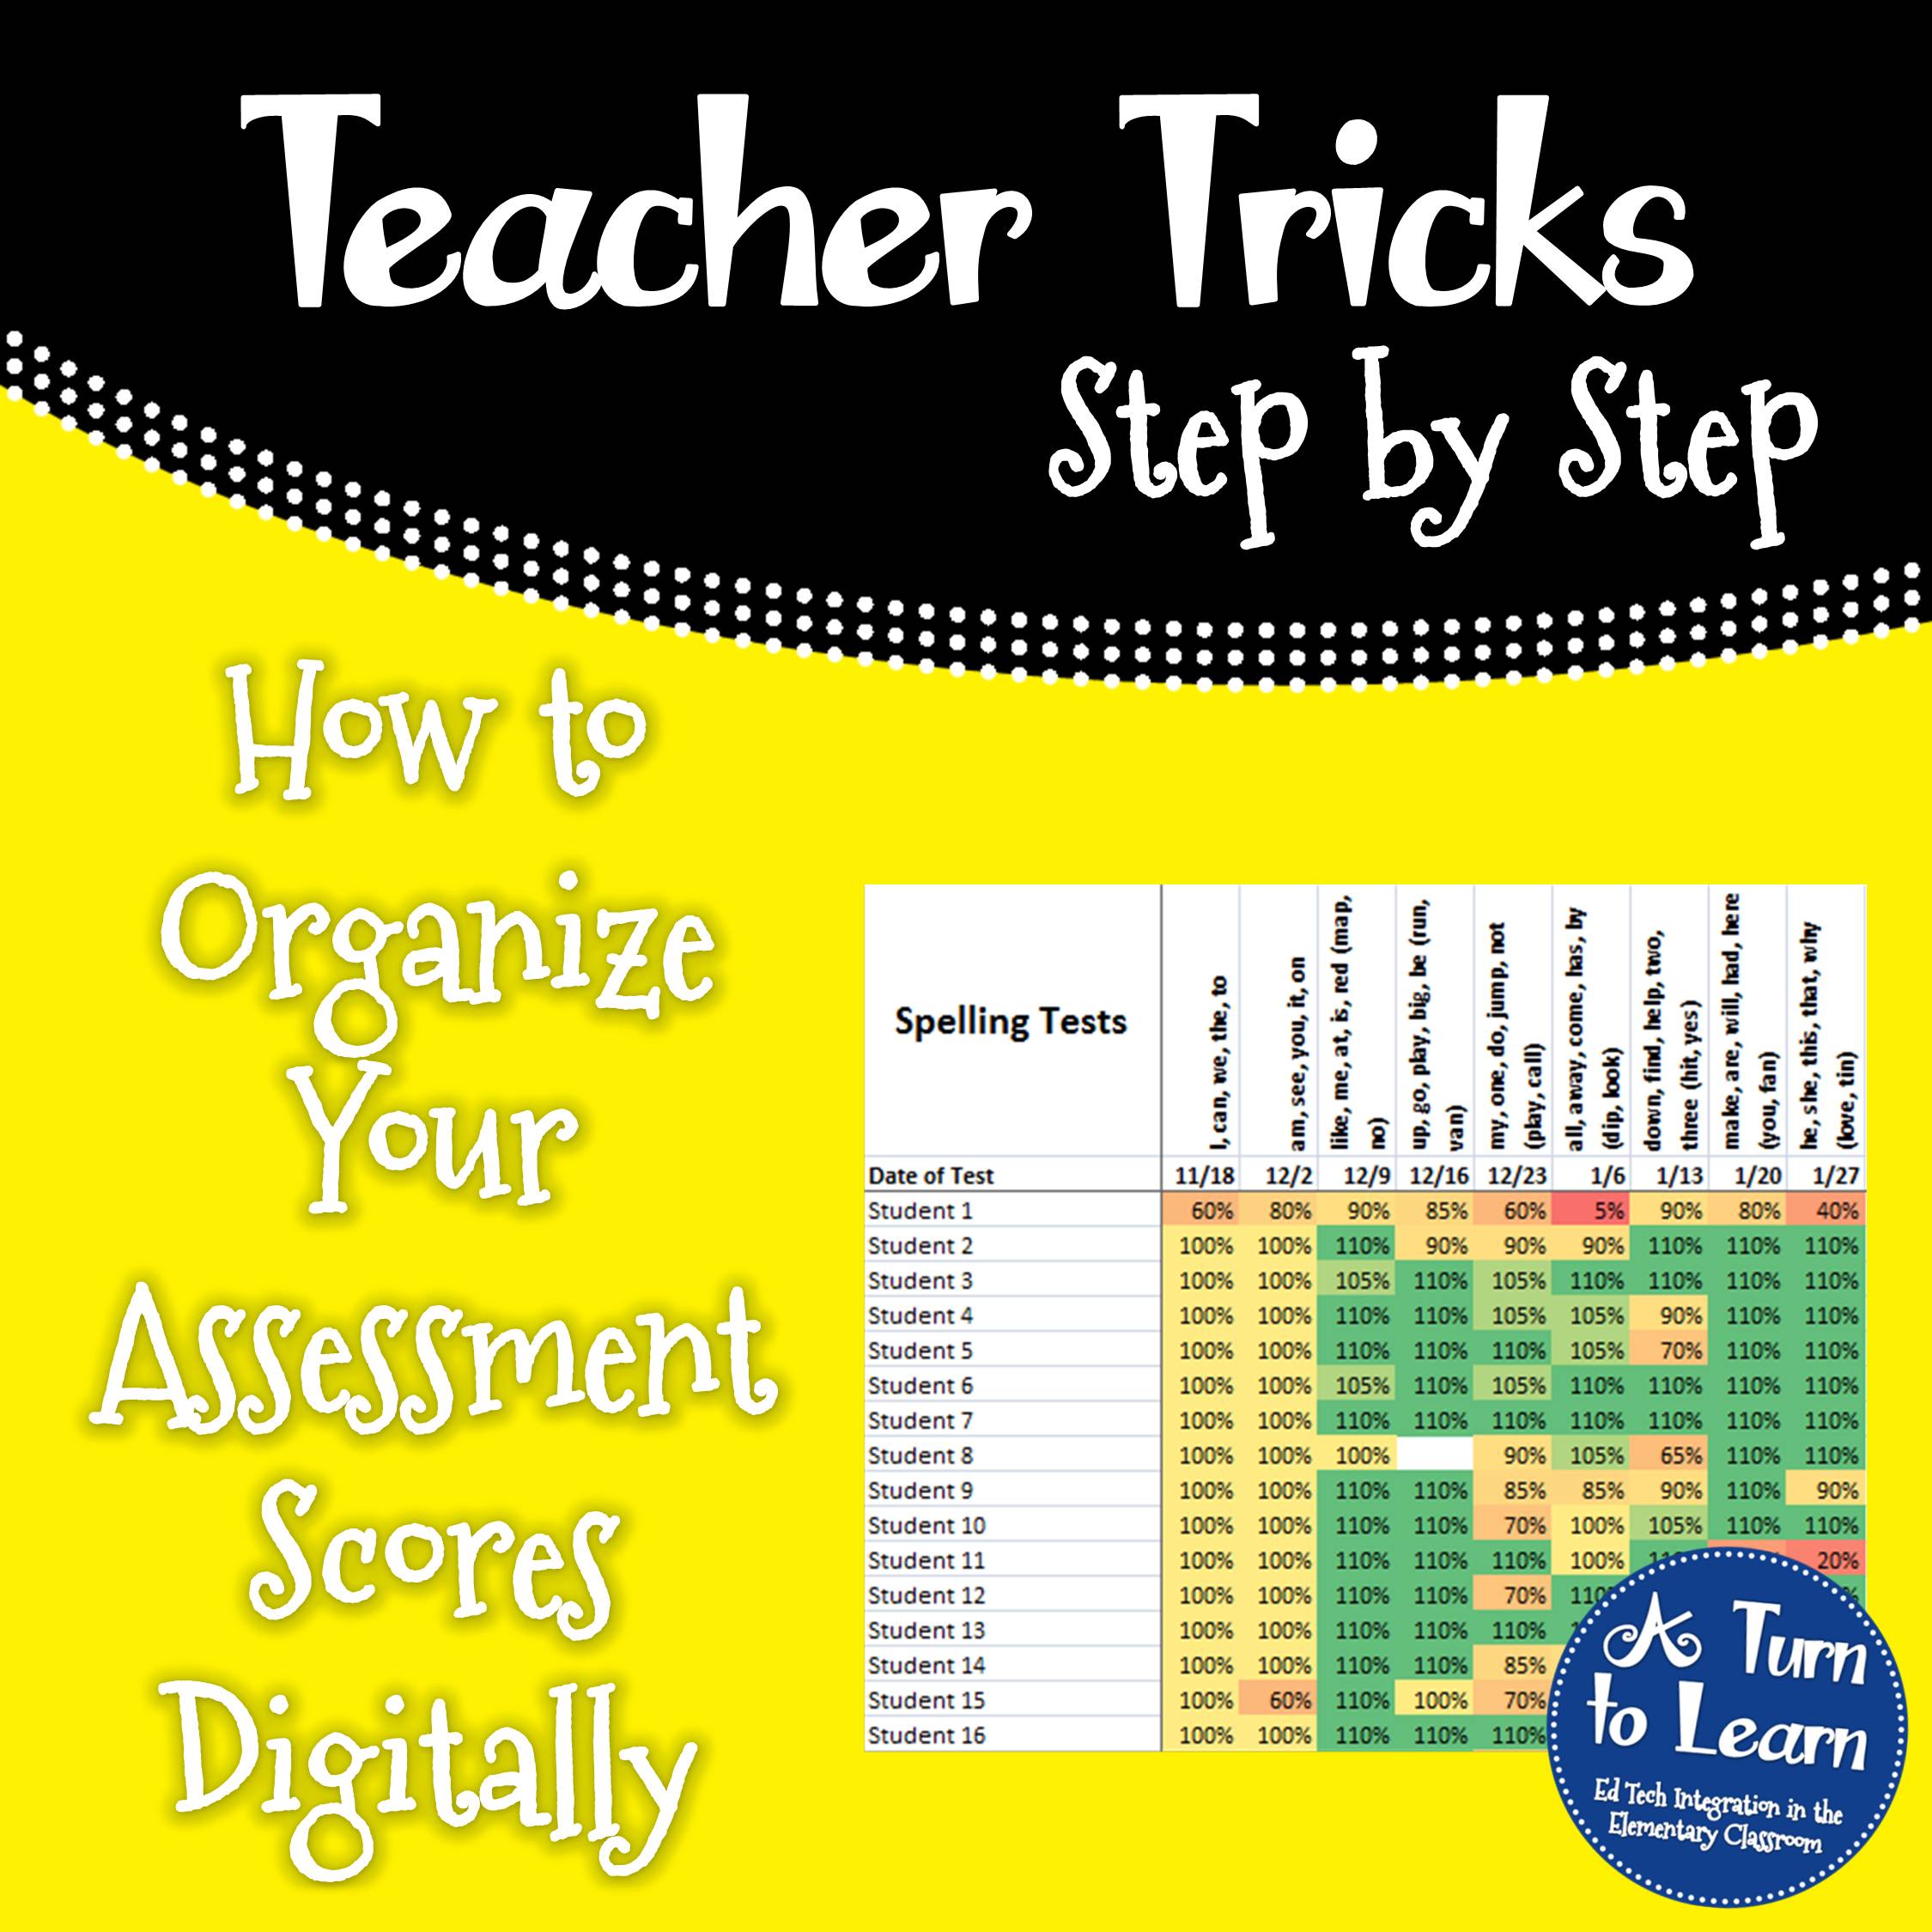 How to Organize Your Assessment Scores Digitally